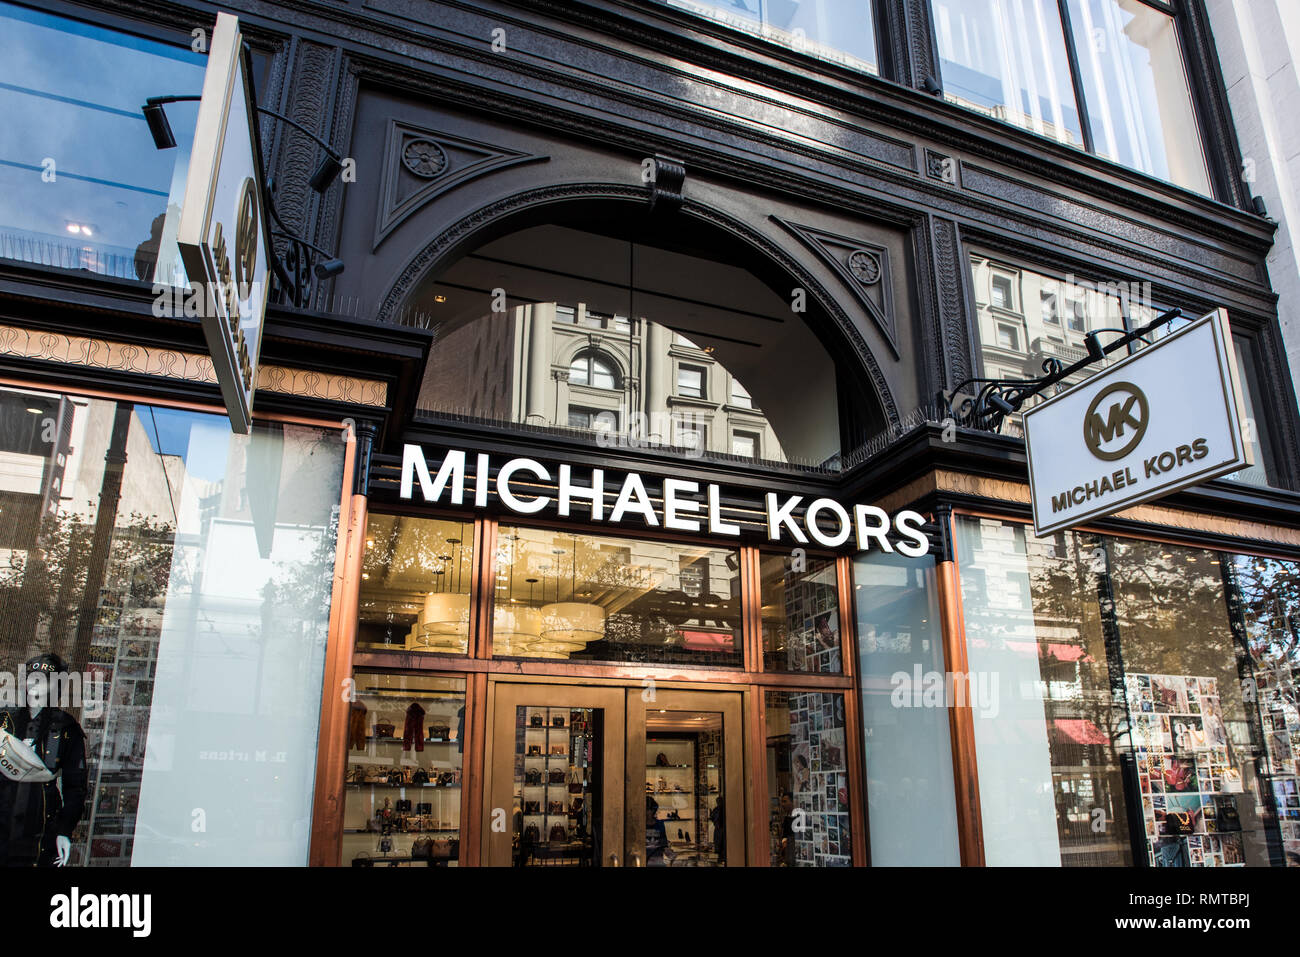 Michael Kors opens first store in France - Telegraph